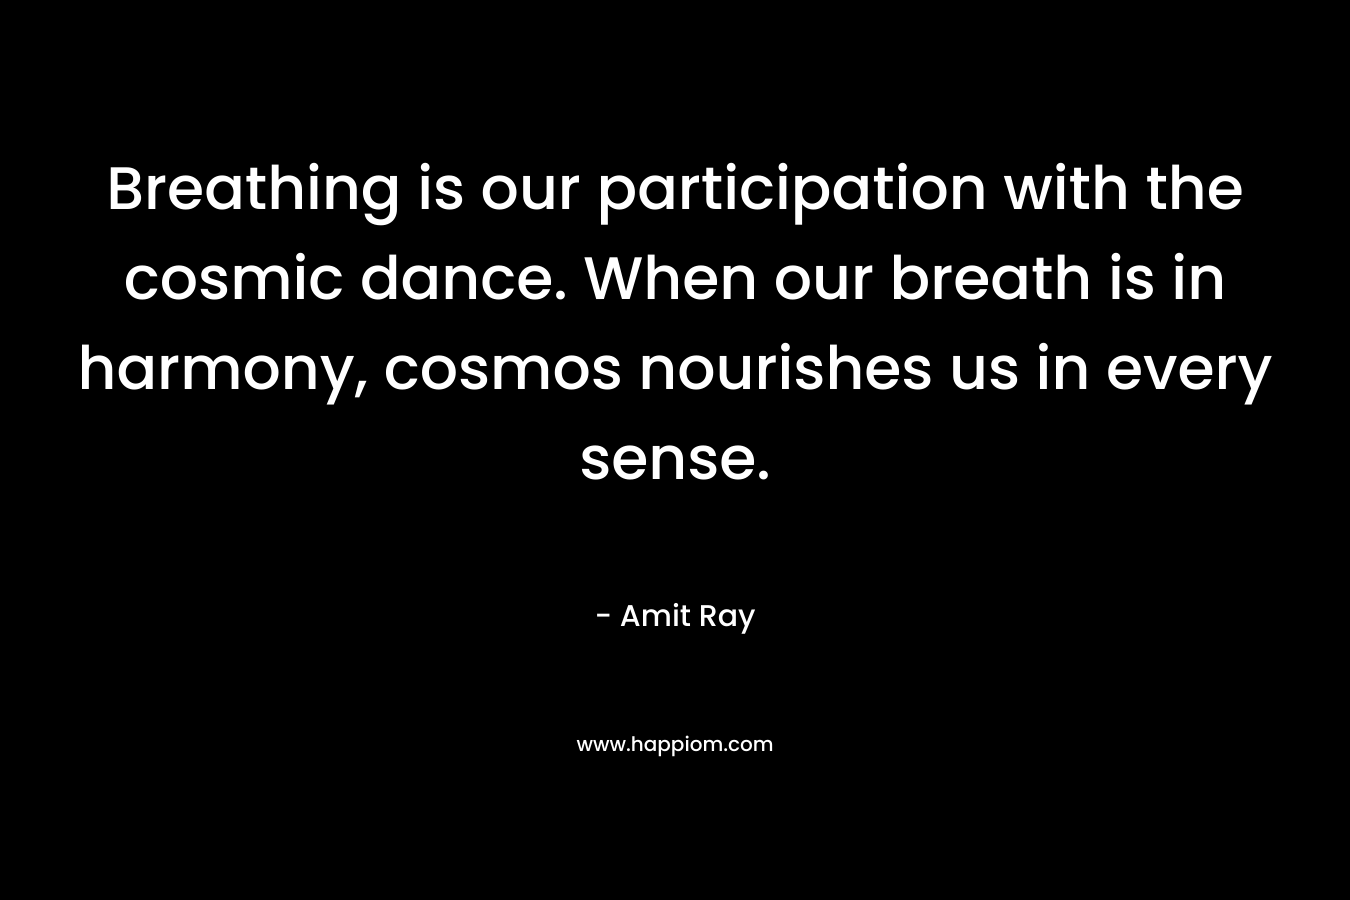 Breathing is our participation with the cosmic dance. When our breath is in harmony, cosmos nourishes us in every sense.